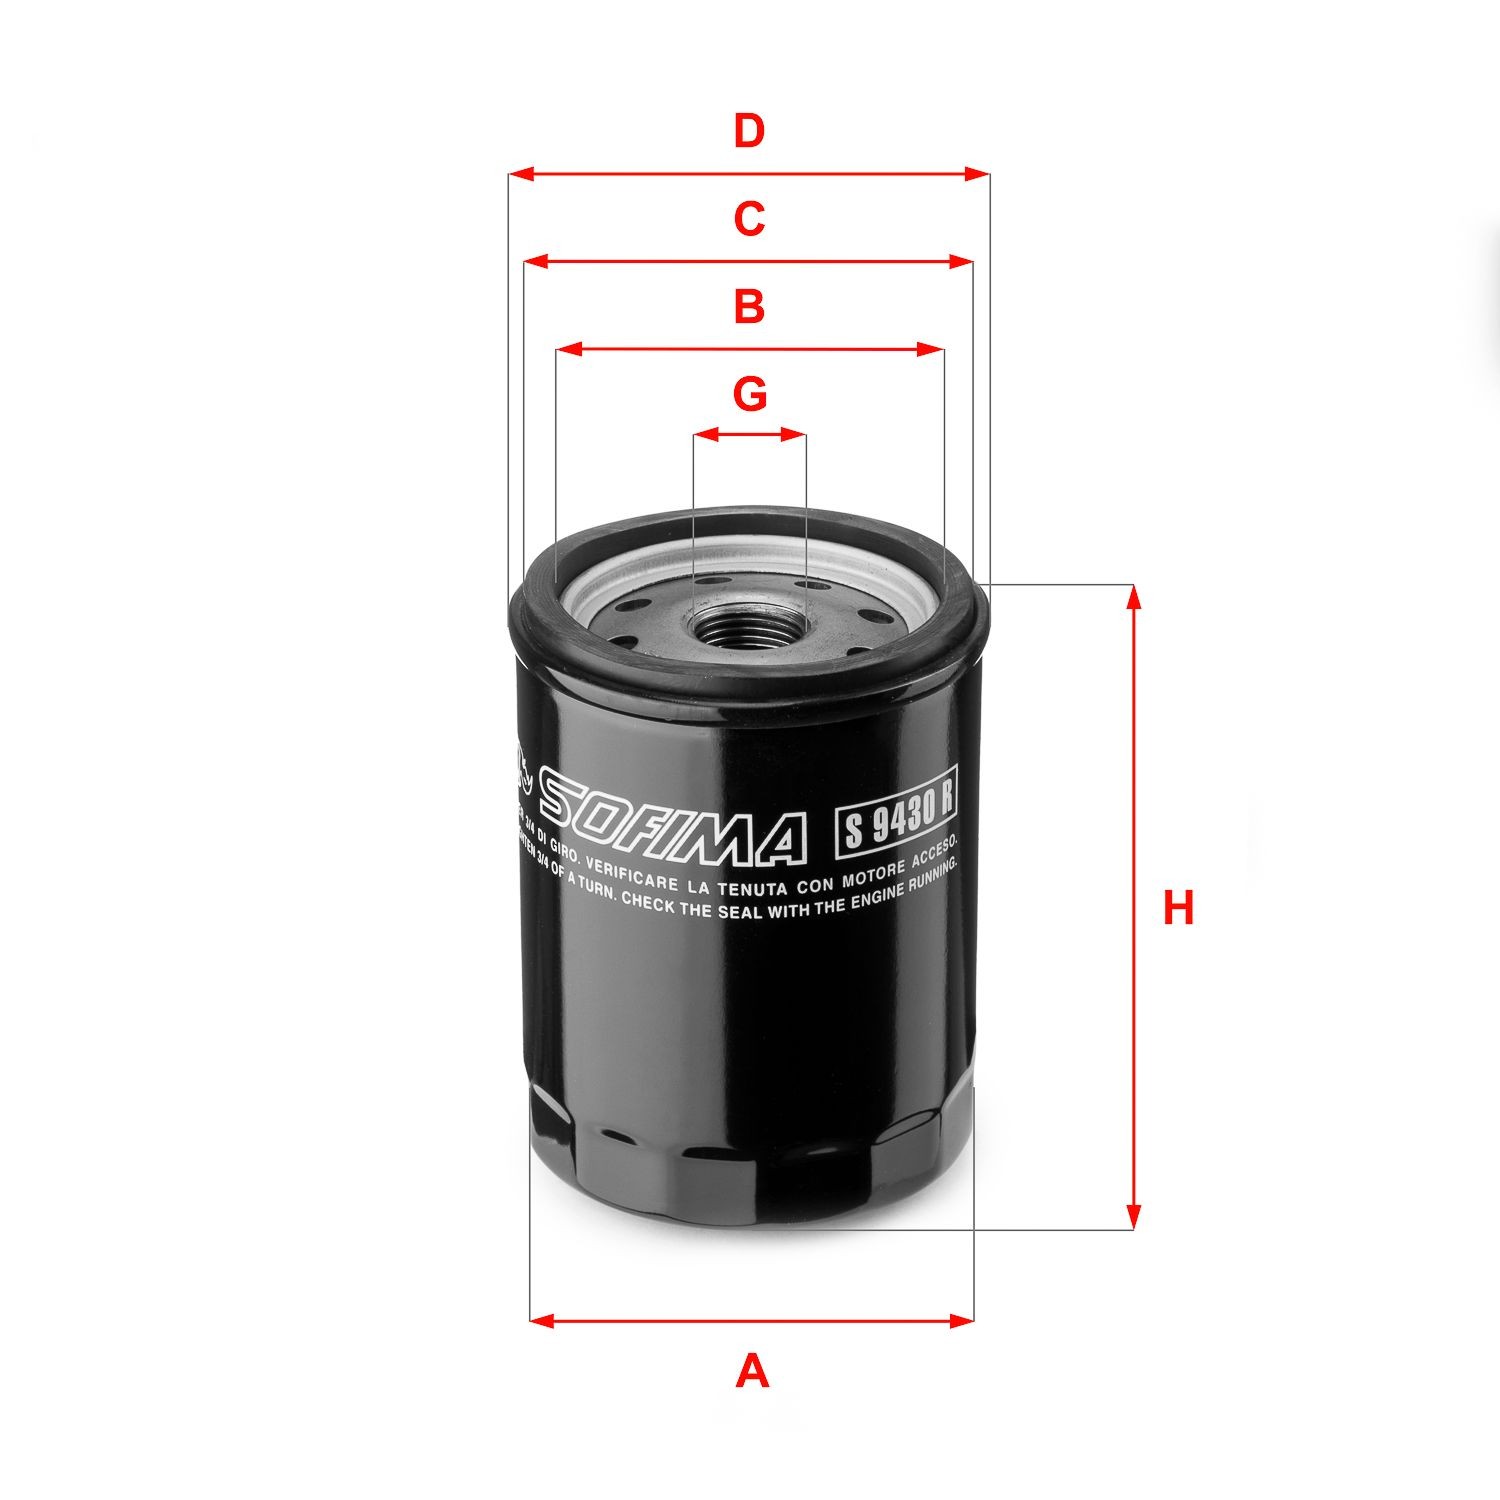 SOFIMA S 9430 R Oil filter 3/4-16 UNF, with one anti-return valve, Spin-on Filter